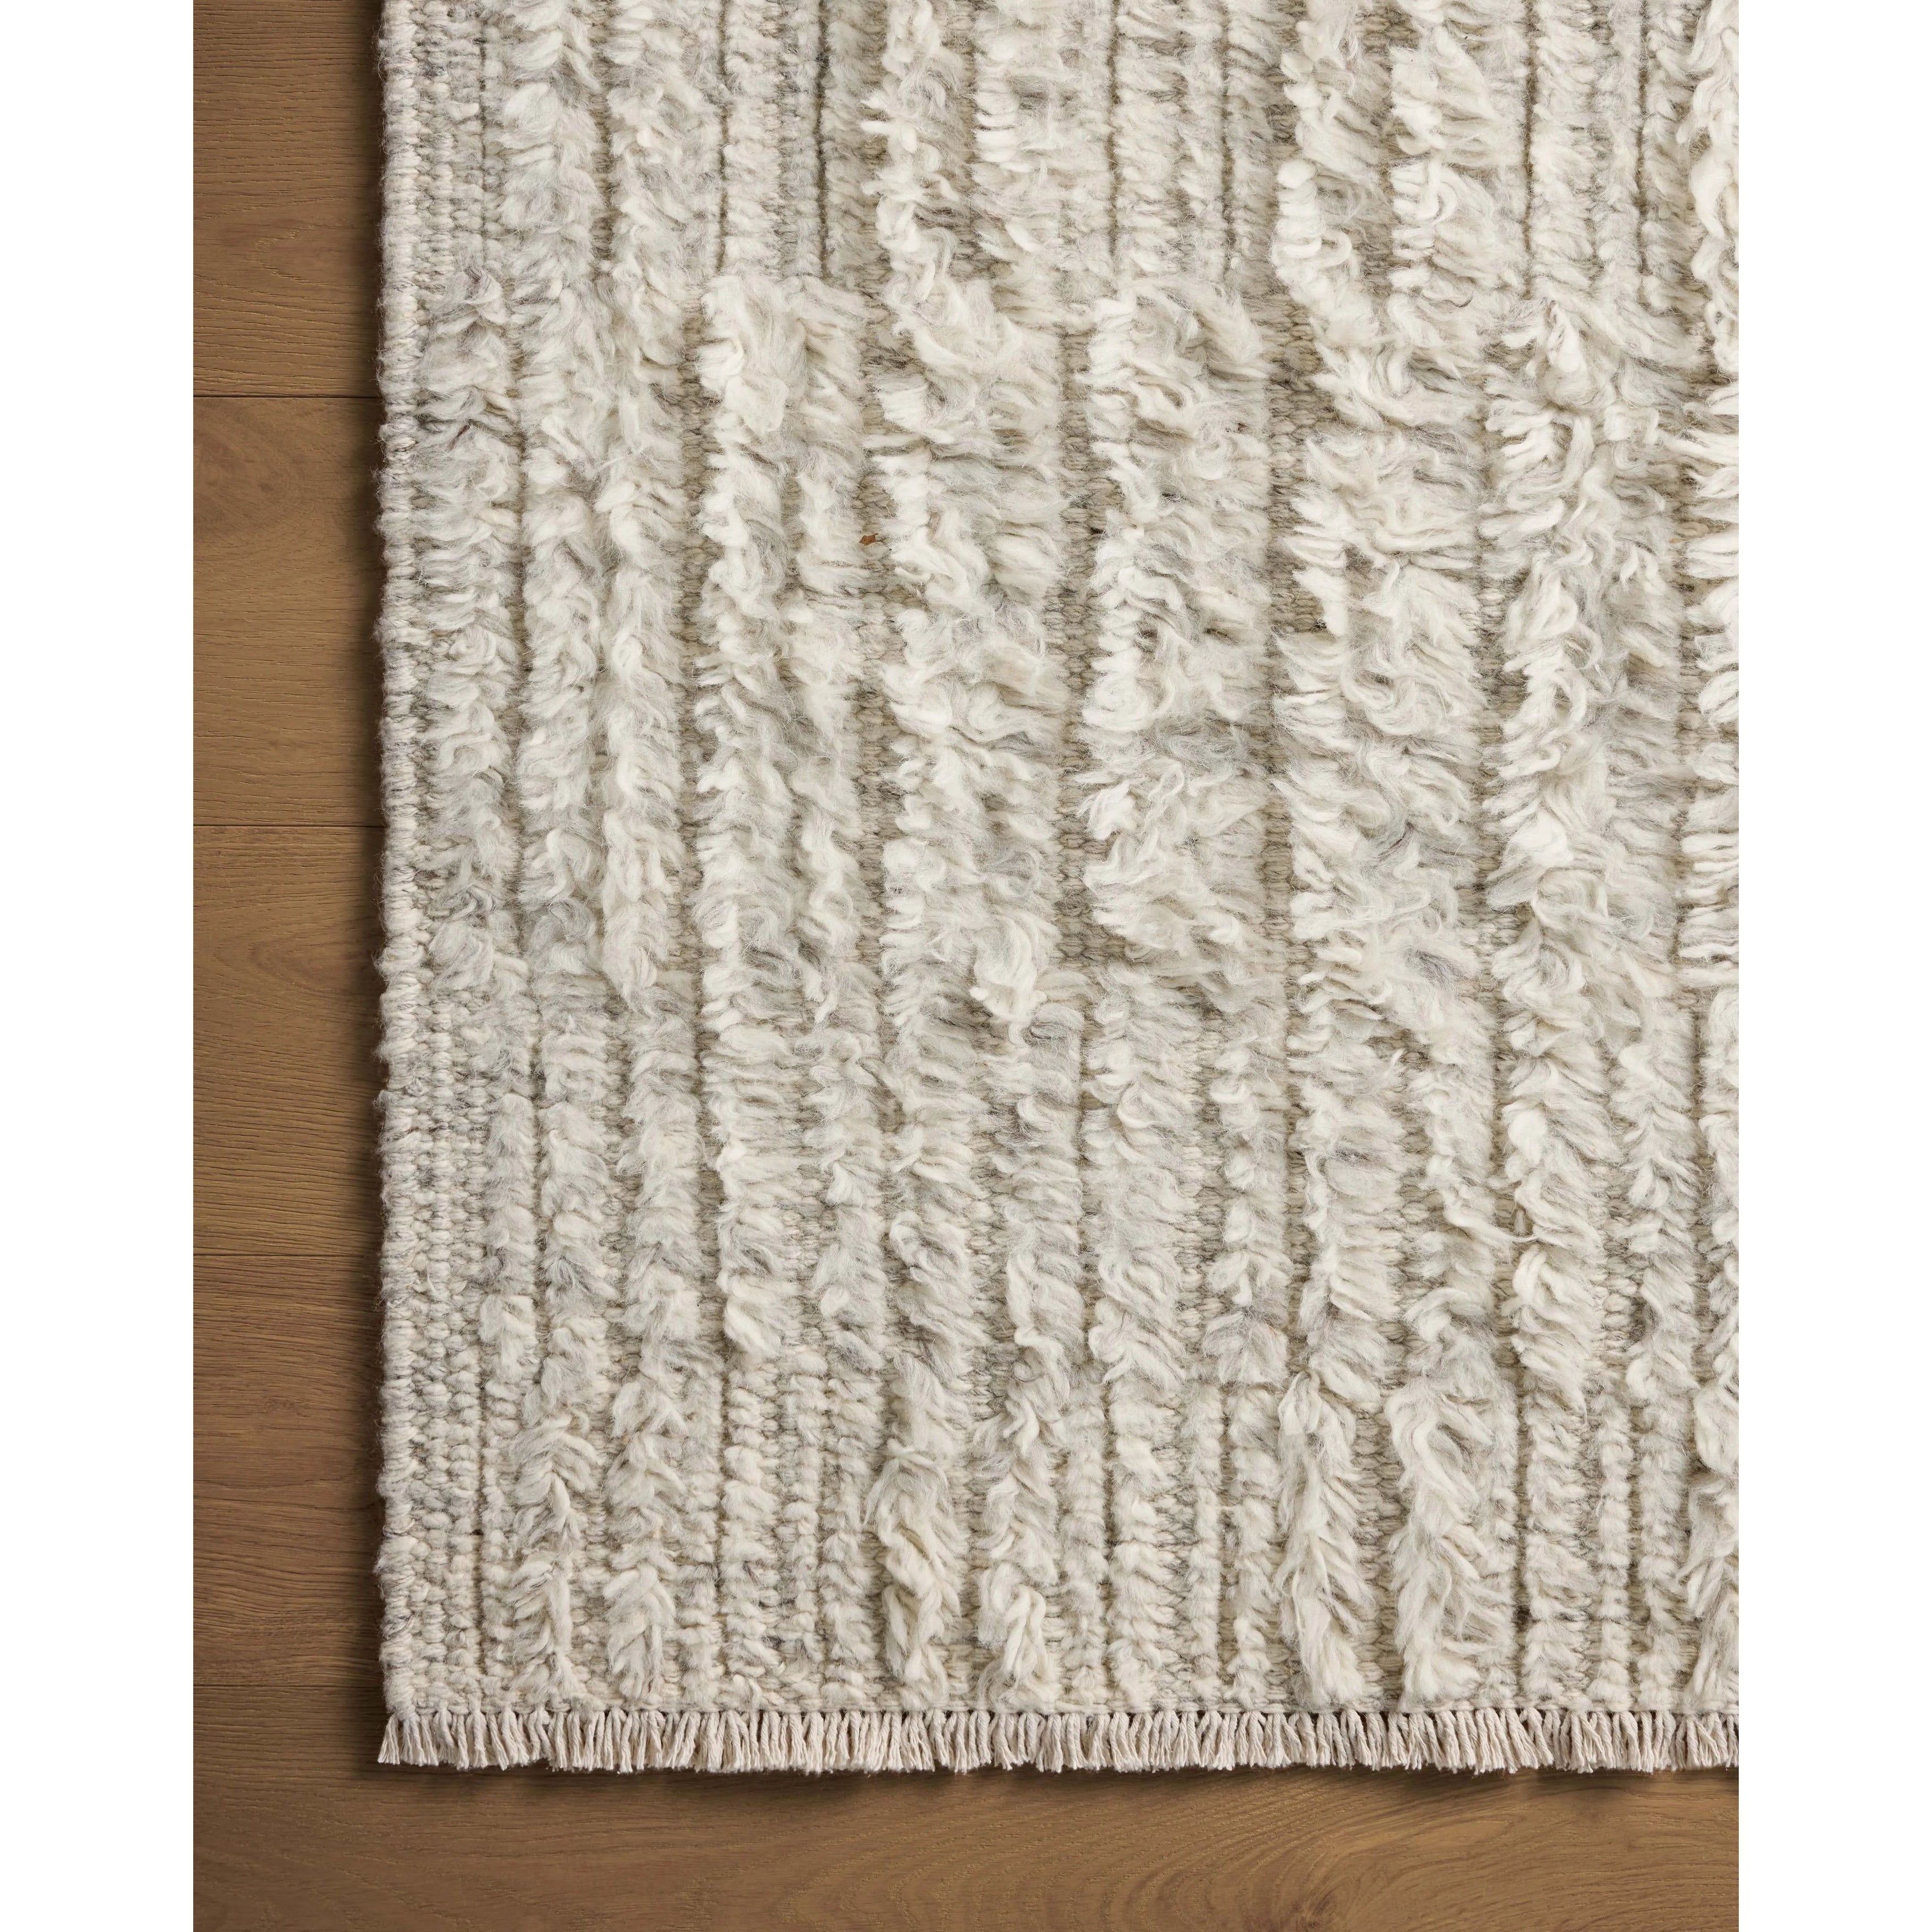 Irresistible to walk upon, the Dana Birch Rug by Brigette Romanek x Loloi has a high-low texture that alternates between a subtly shaggy pile and a soft base. Horizontal broken stripes give the area rug a fresh and energized structure, while a finish of fringe along the edges accentuates its sense of movement. Amethyst Home provides interior design, new home construction design consulting, vintage area rugs, and lighting in the Washington metro area.